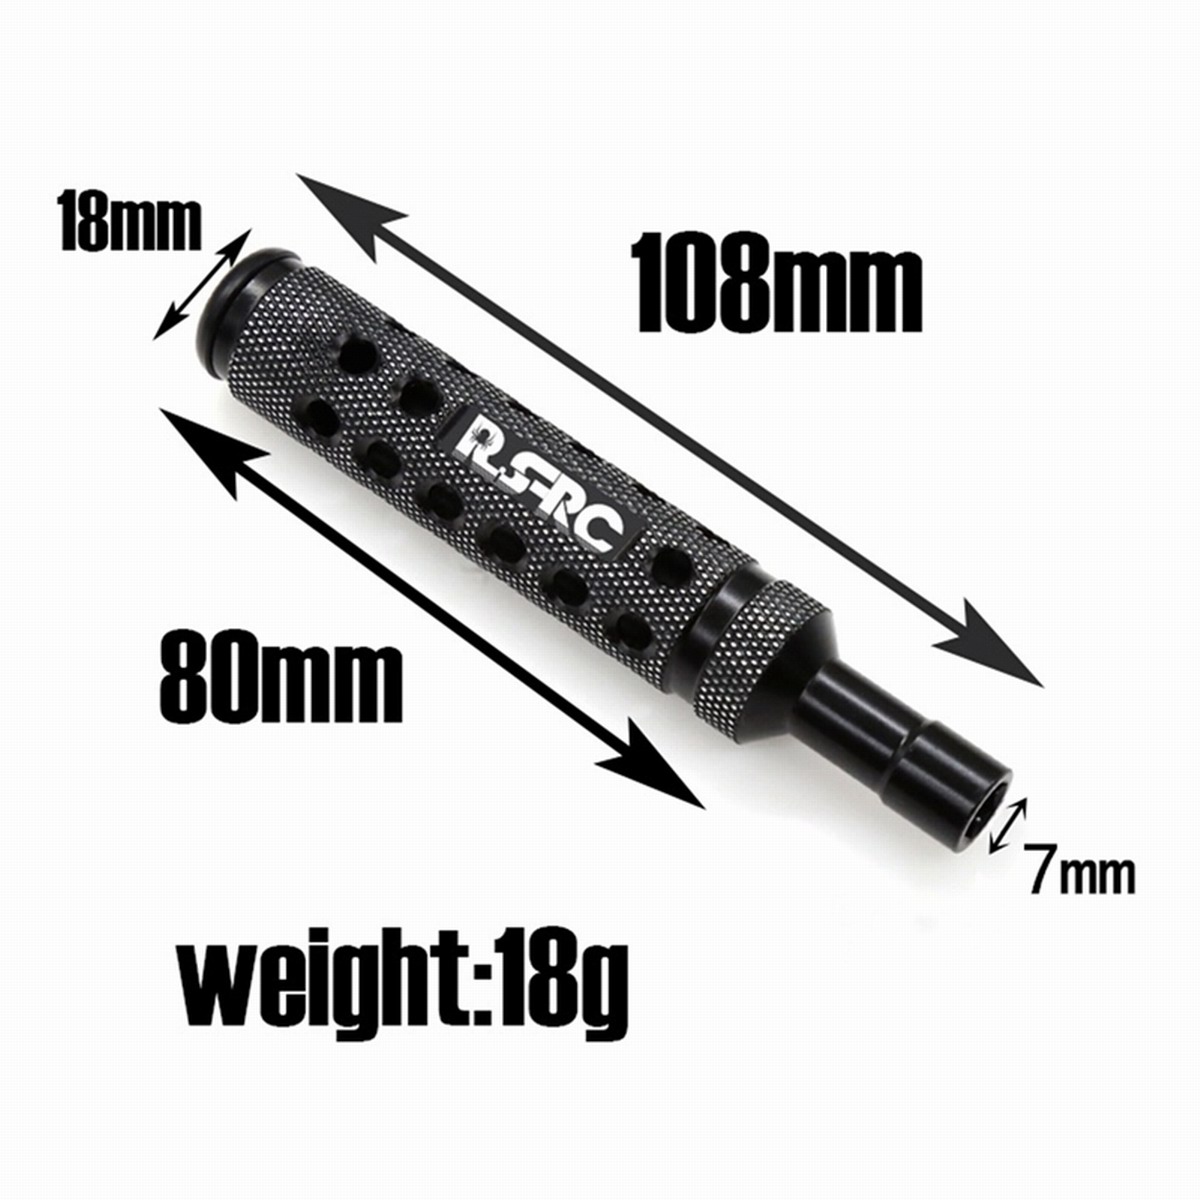 7 MM Socket Wrench Hex Screwdriver Tool For M4 Lock Nut RC Car Drone Spanner Hex Socket HUDY Quadcopter FPV Drone UAV